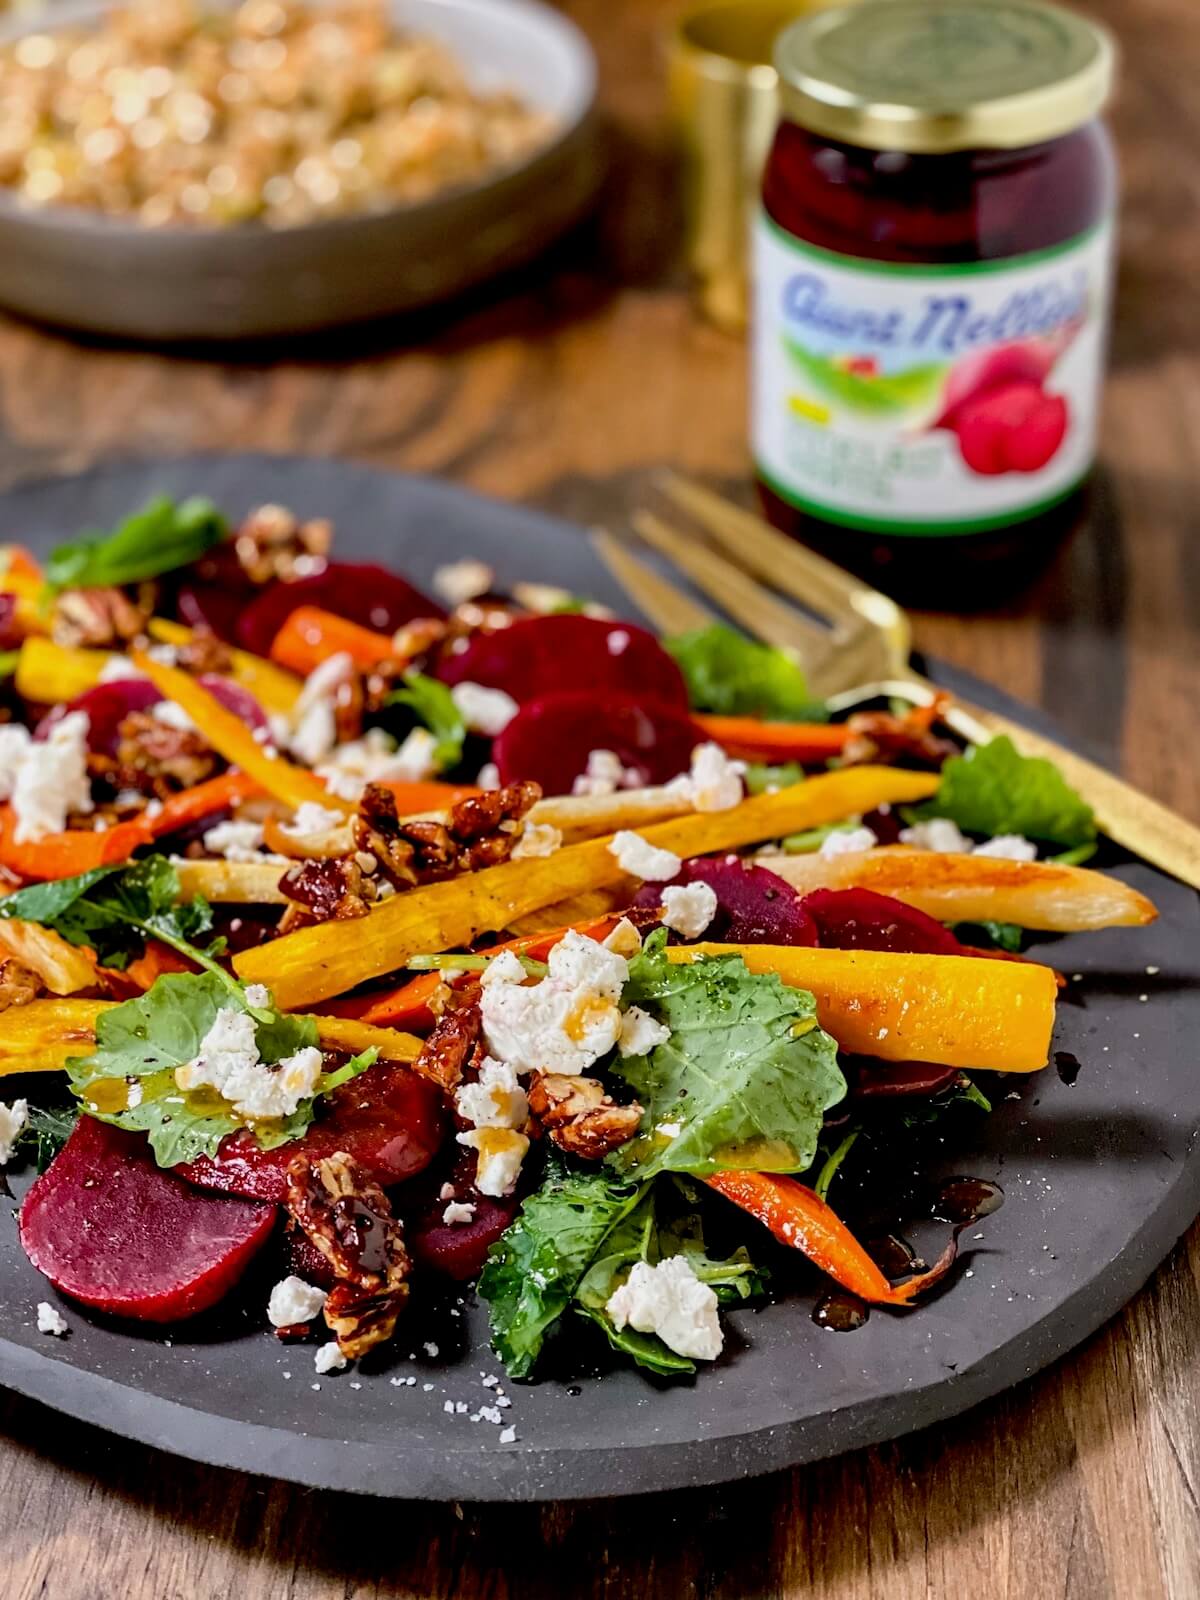 aunt nellie's beets with roasted carrot salad